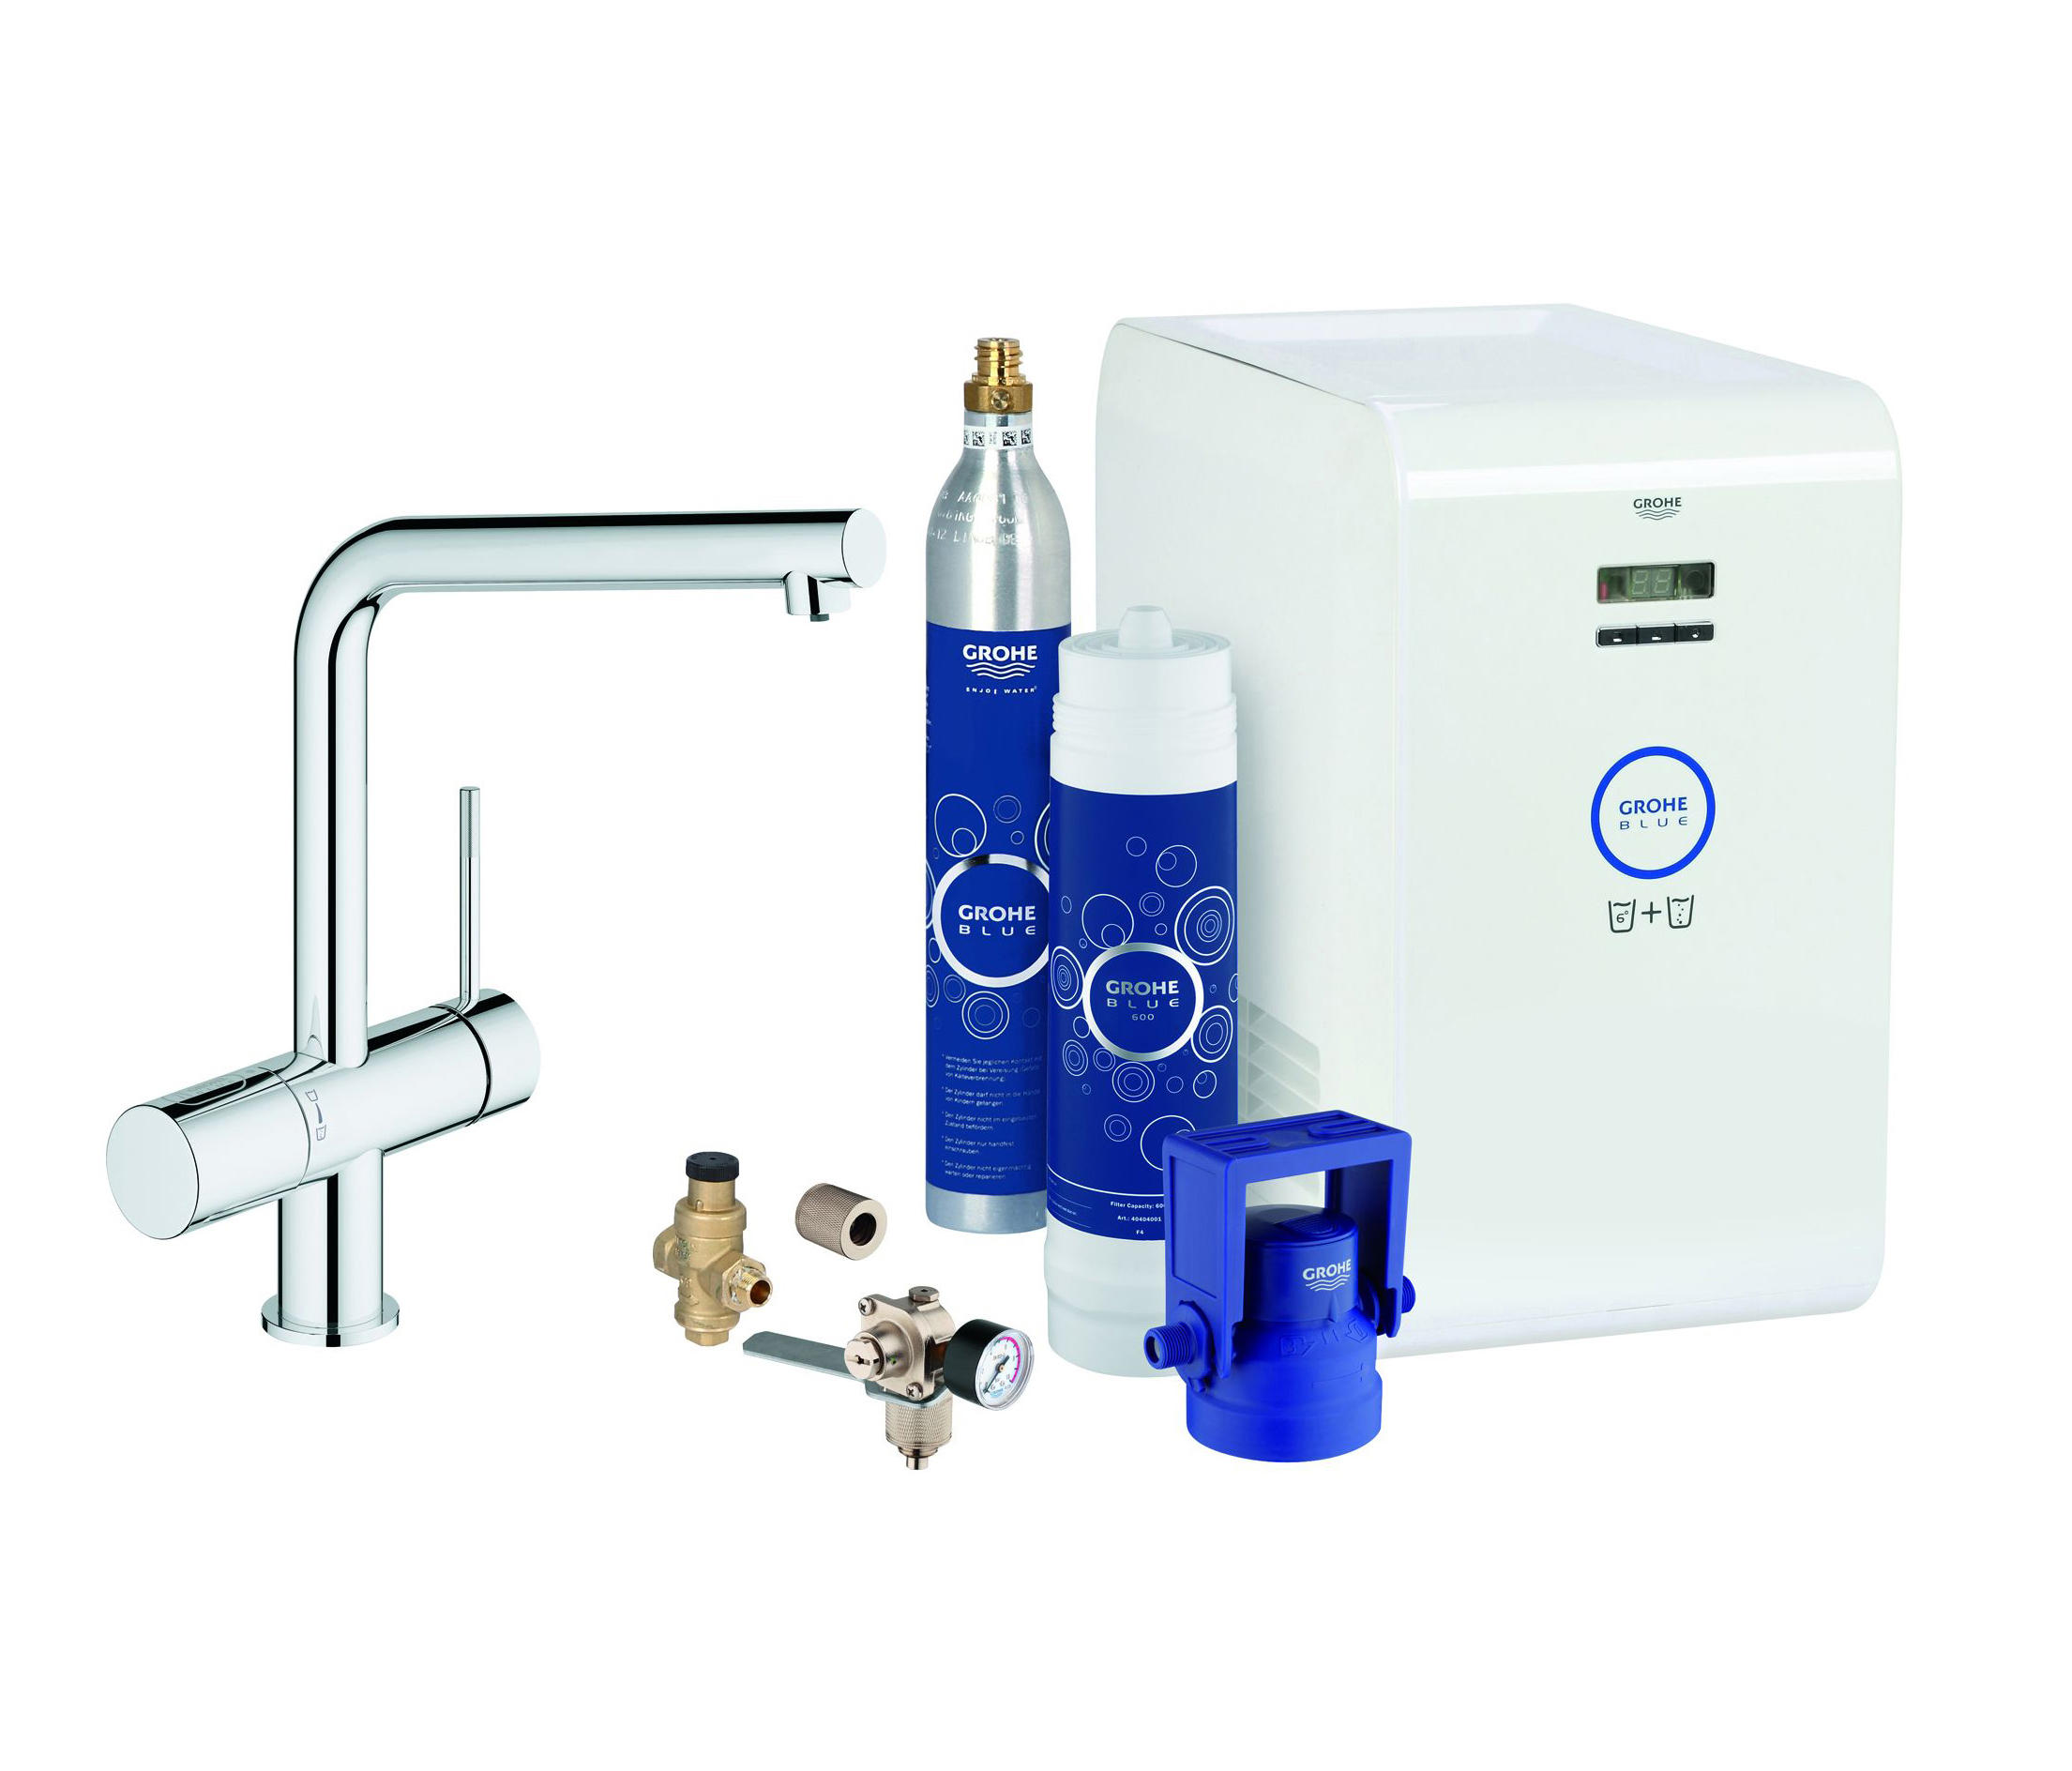 Gallery of Sink Mixer Starter Kit - Blue Pure Minta - 1